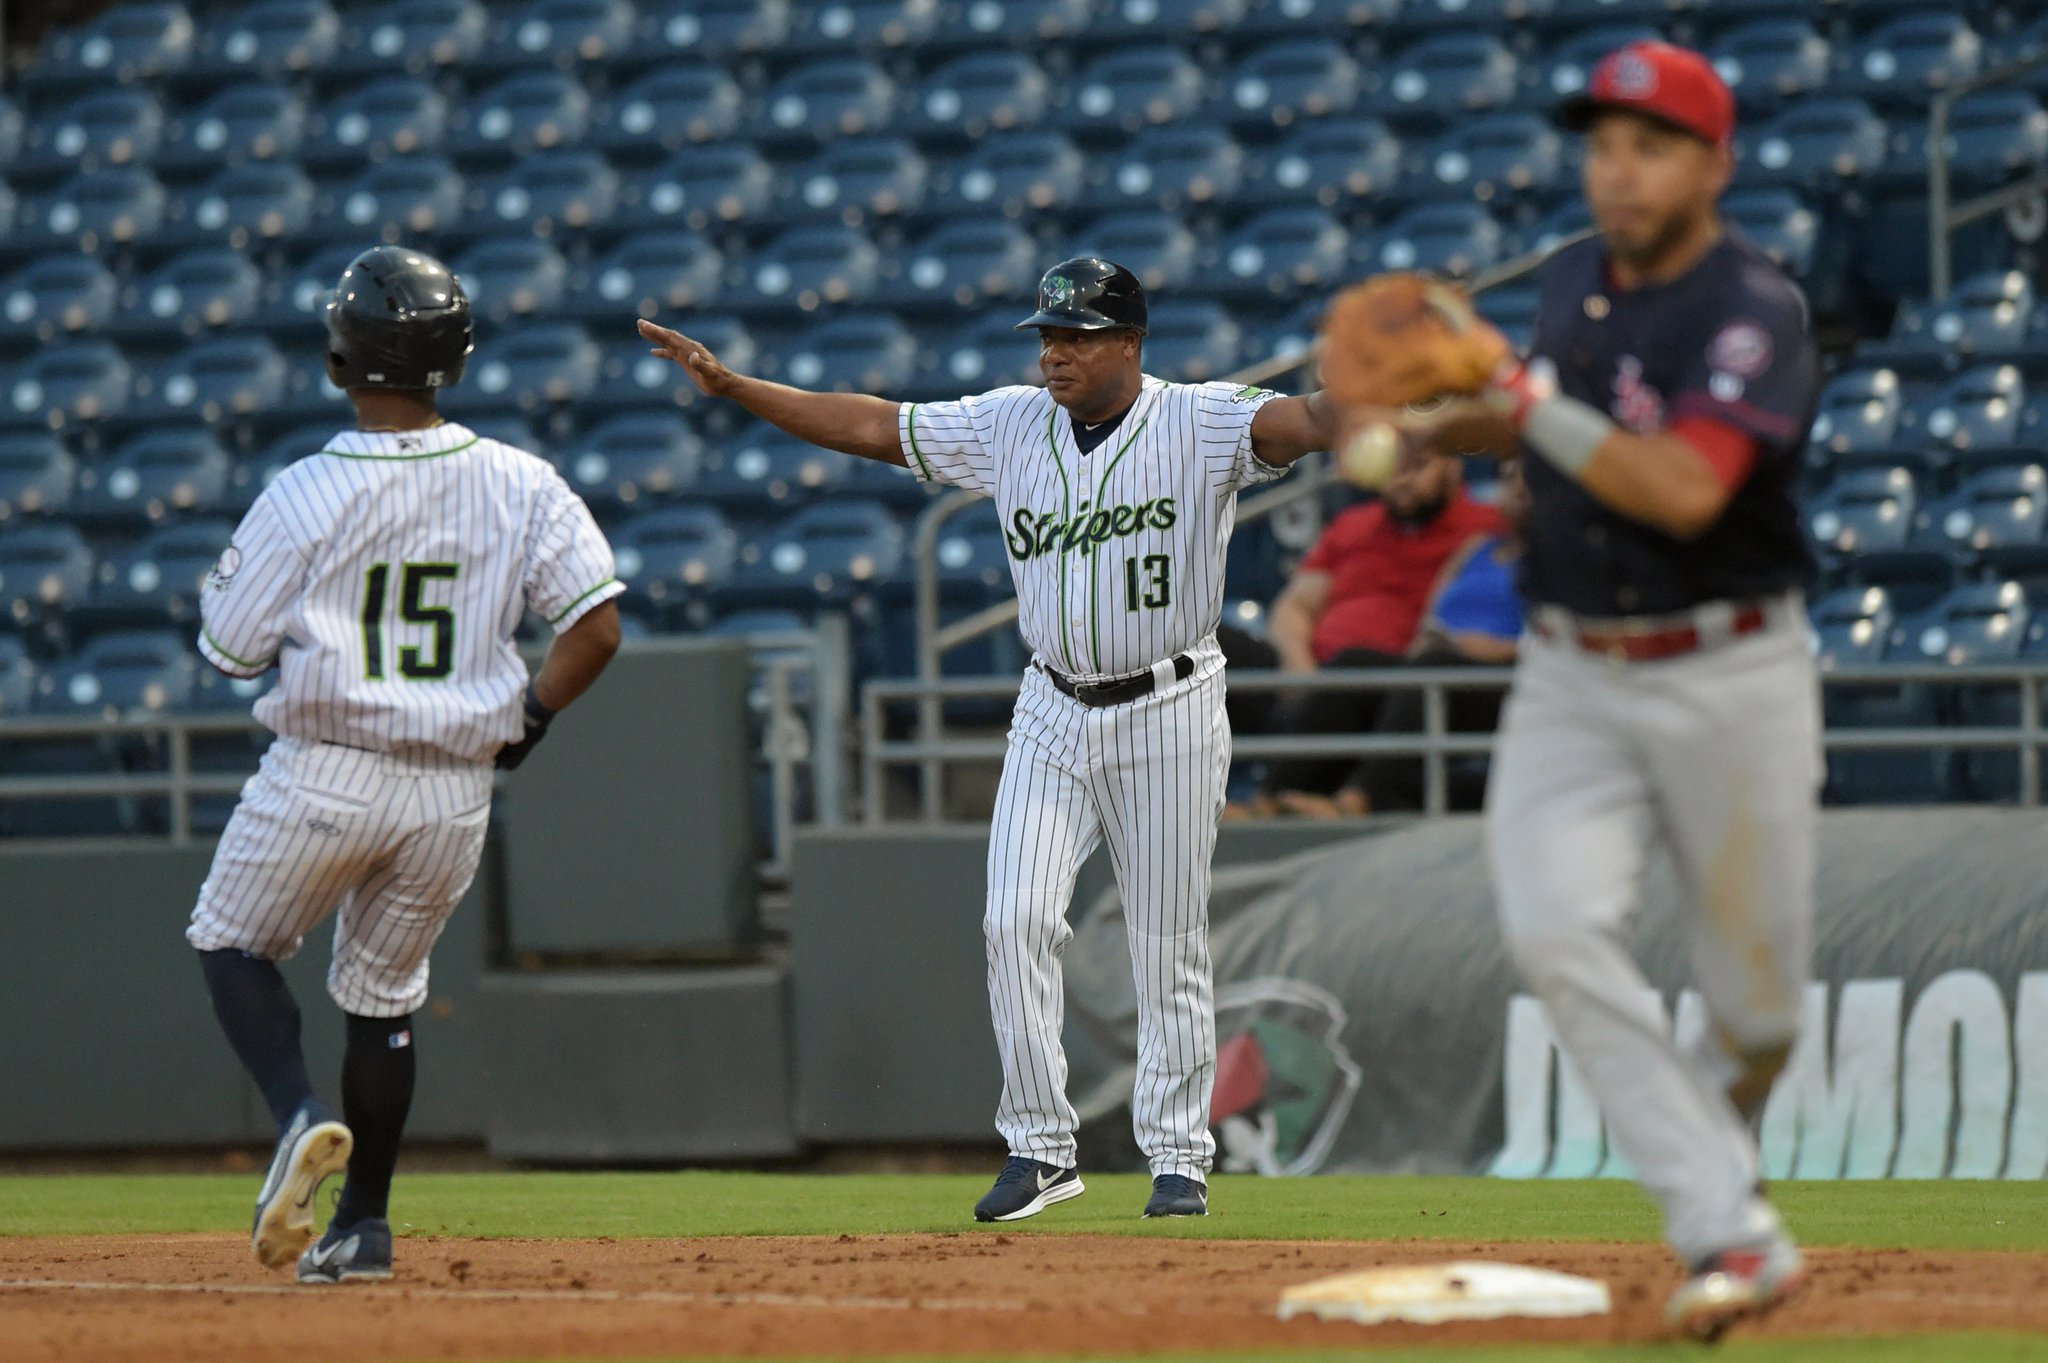 Gwinnett Stripers - Good luck to all those NCAA teams on the